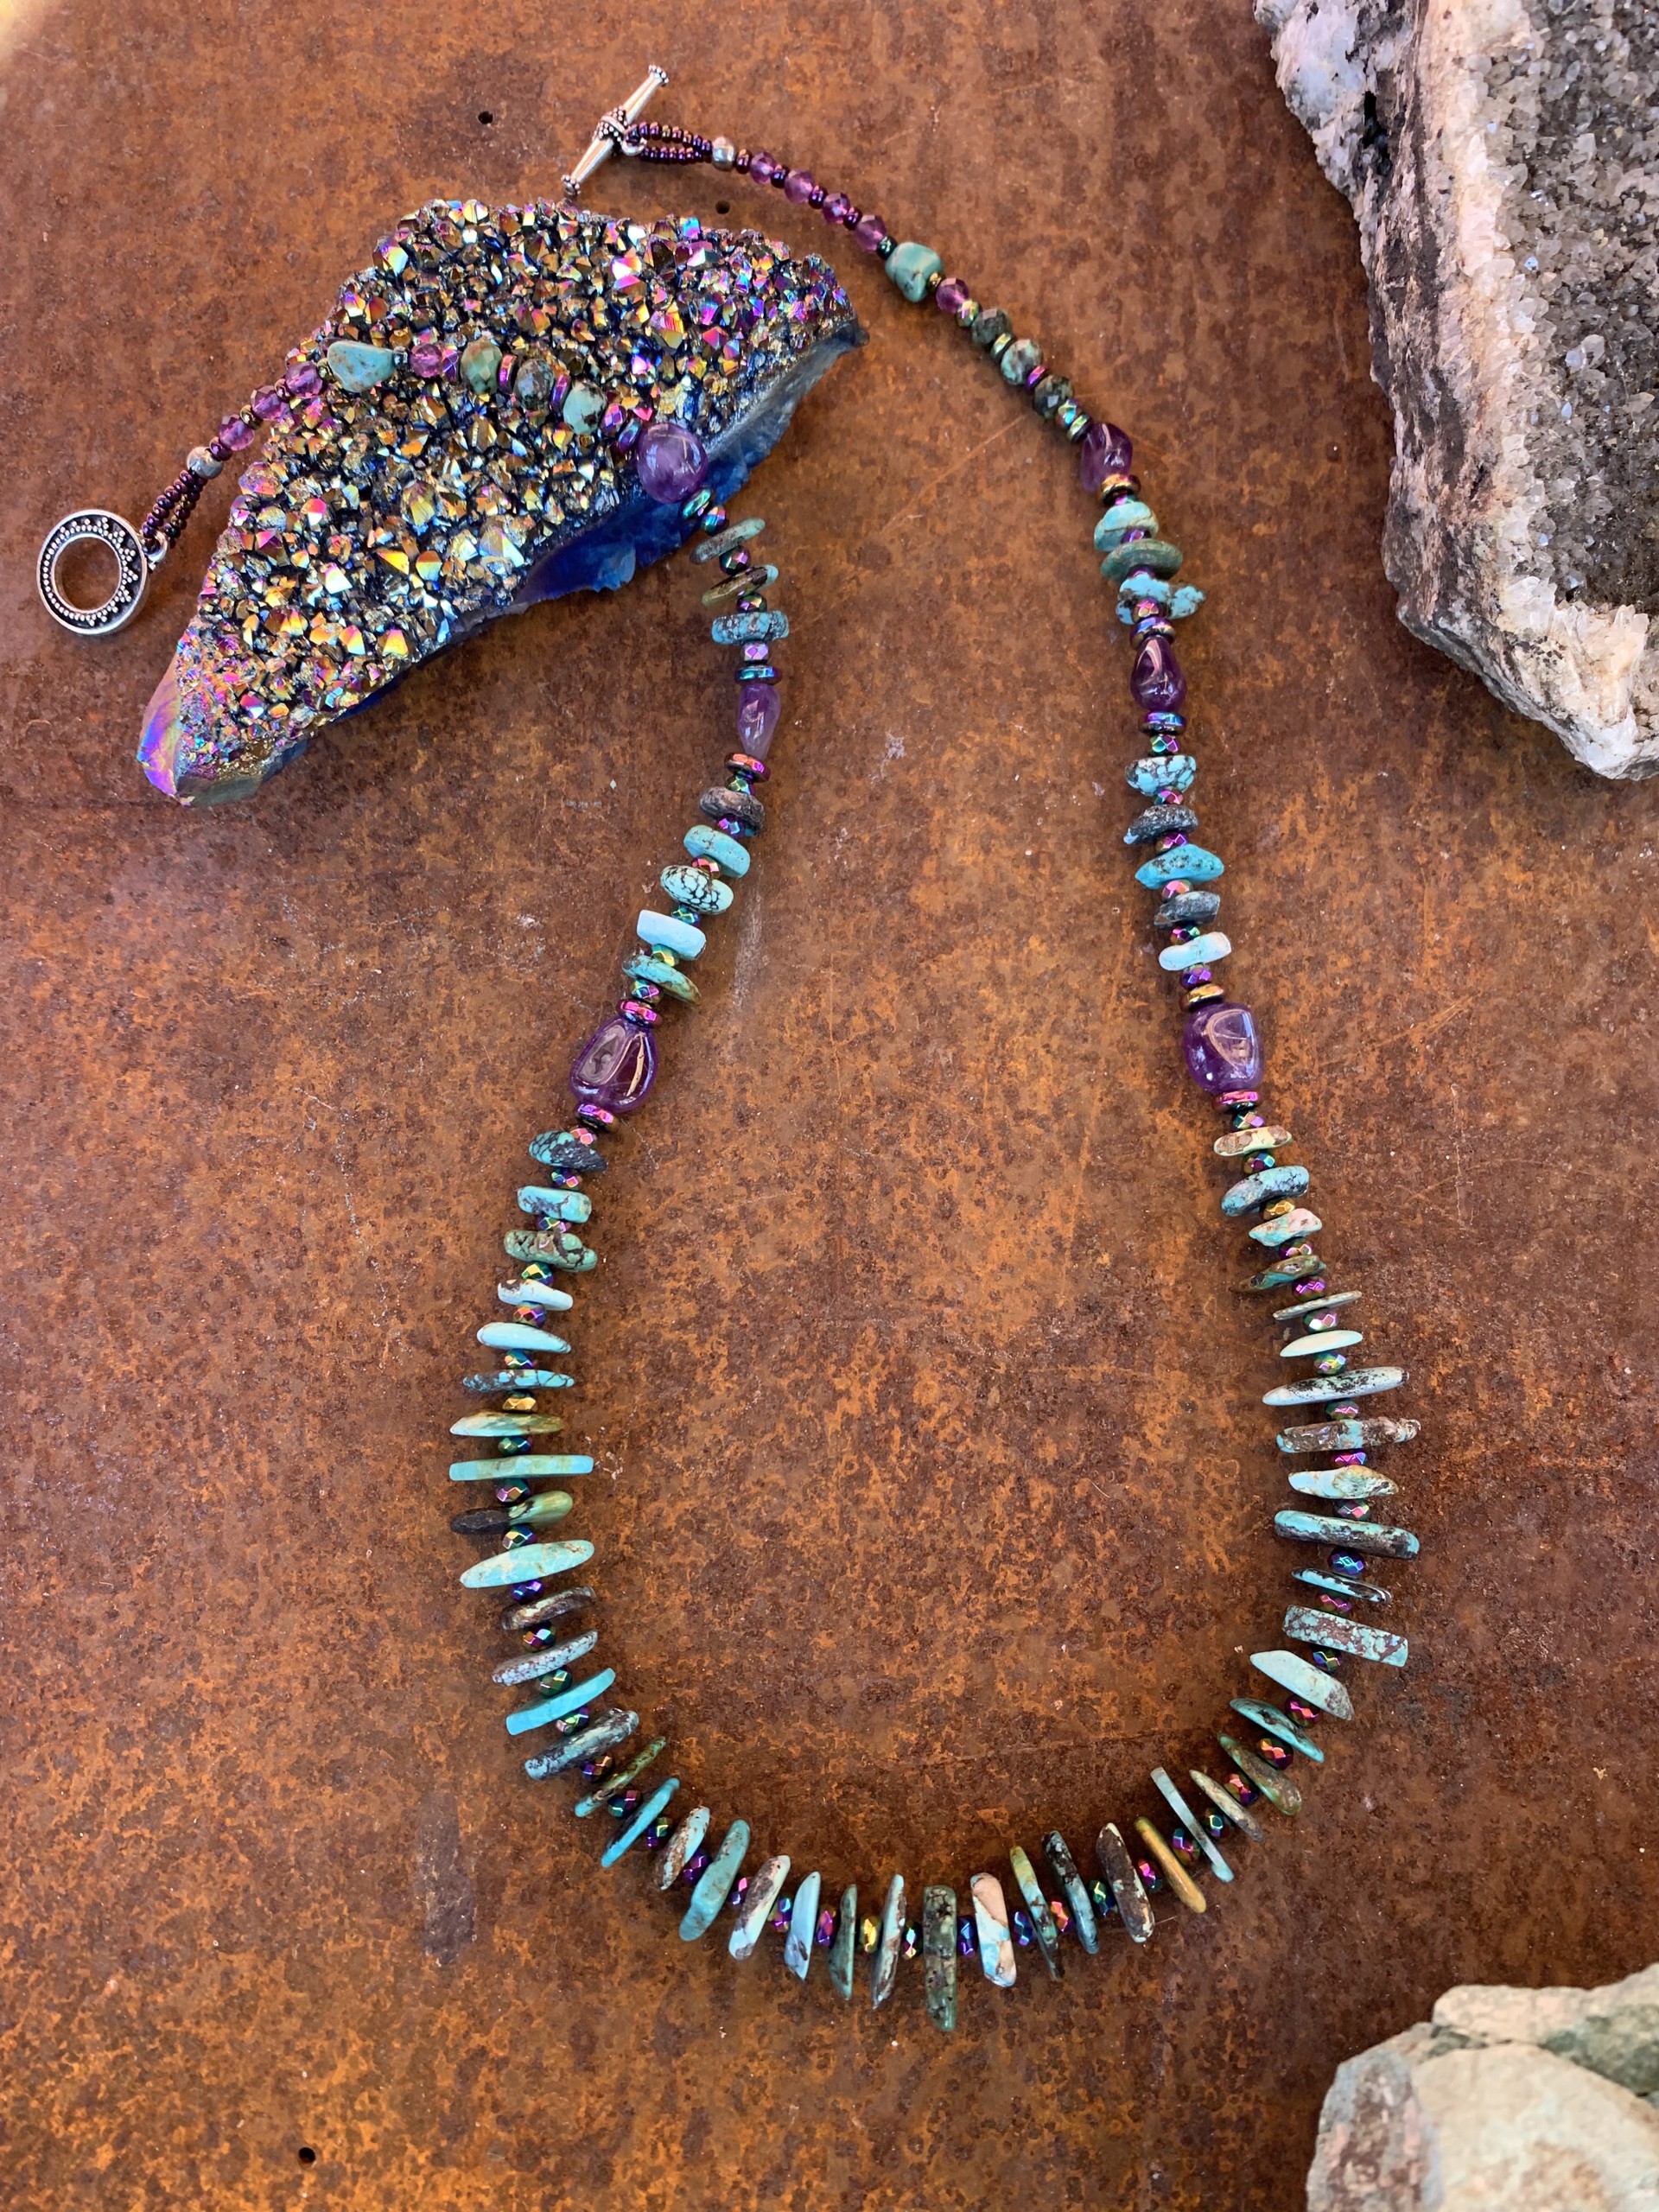 K757 Turquoise Chip Amethyst and Hematite Necklace by Kelly Ormsby